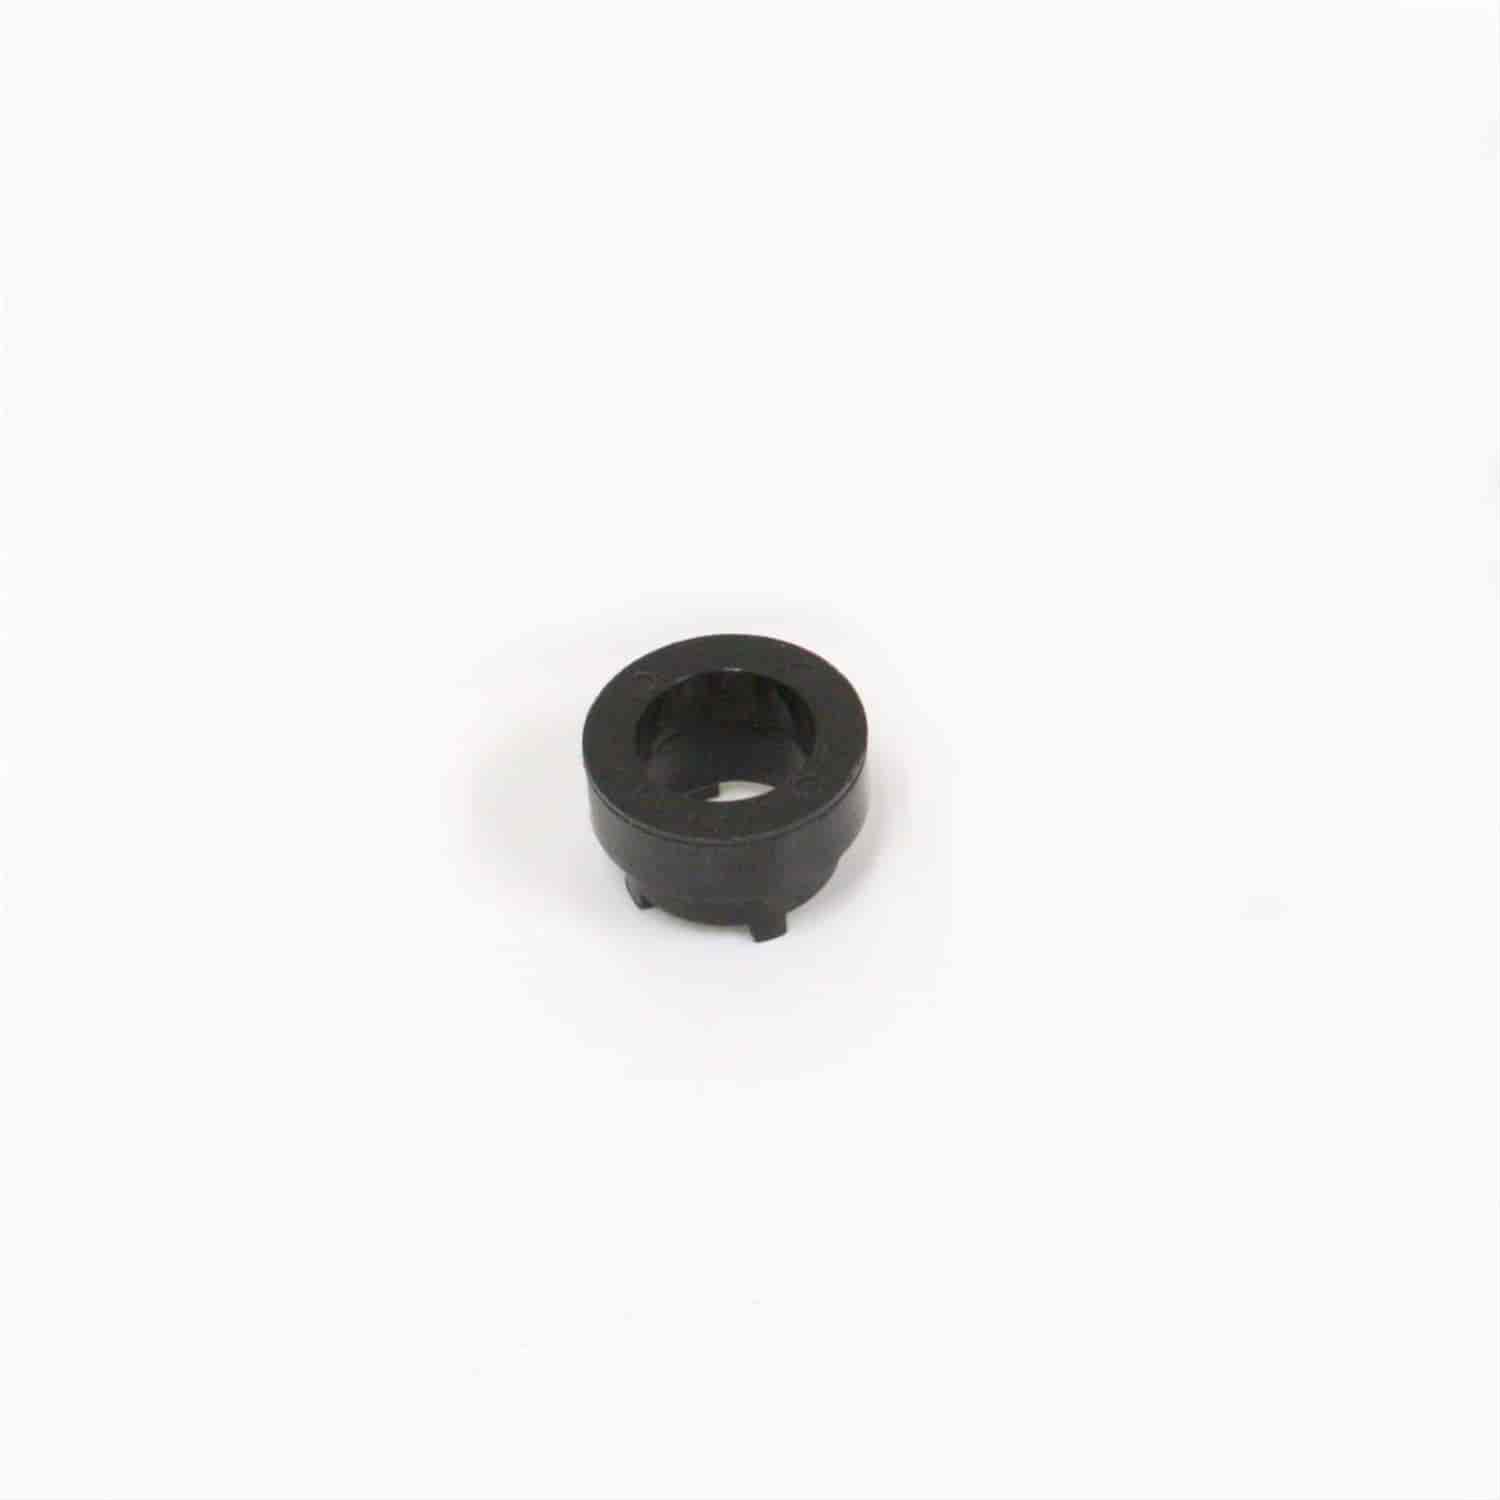 PerTronix LU-147A3 Magnet Sleeve (only) for LU-147A Ignitor Kit